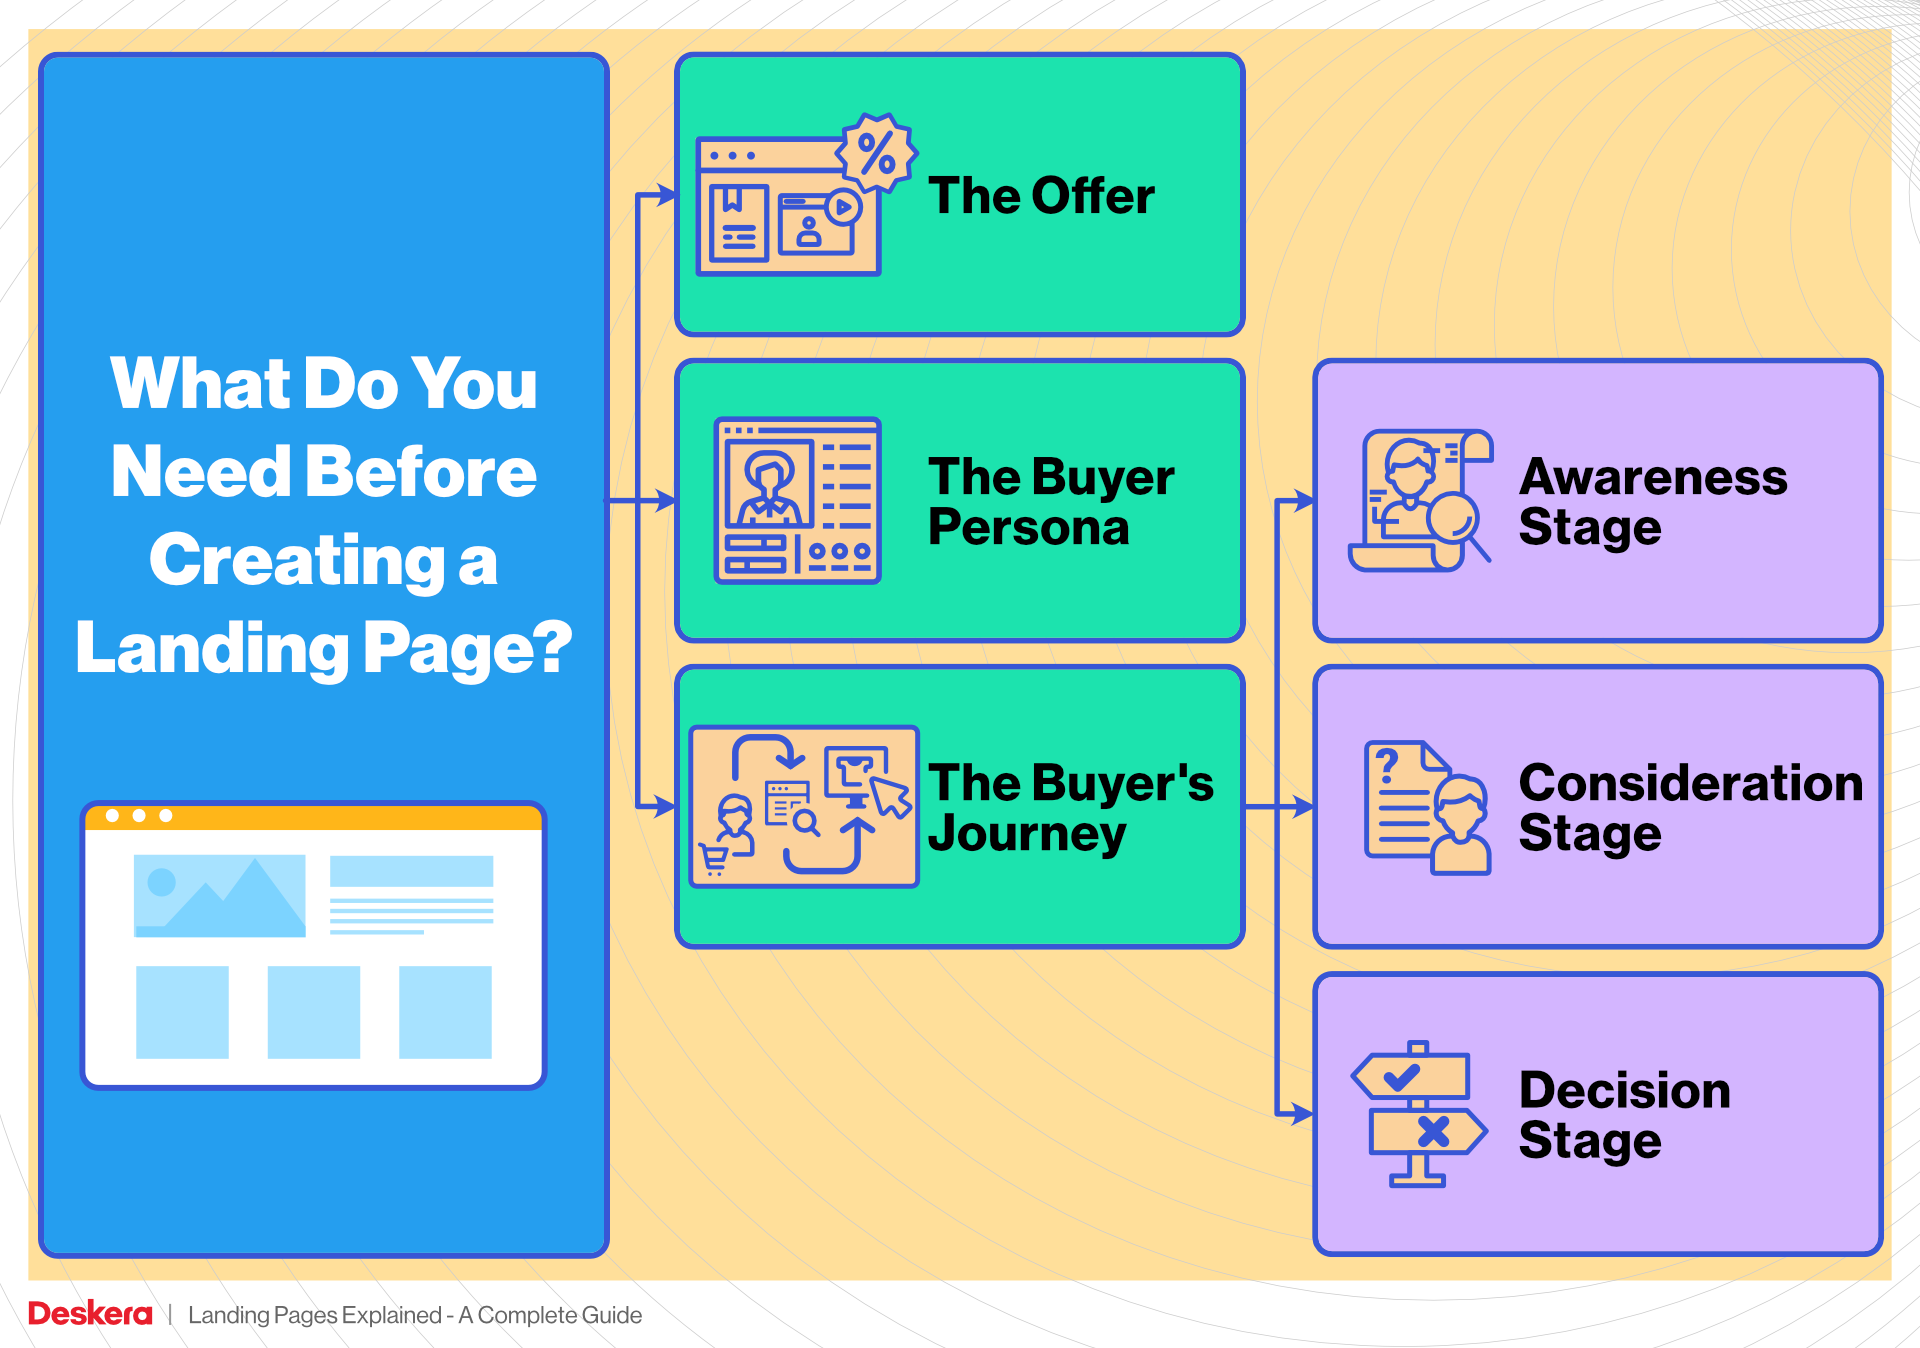 What Do You Need Before Creating a Landing Page?